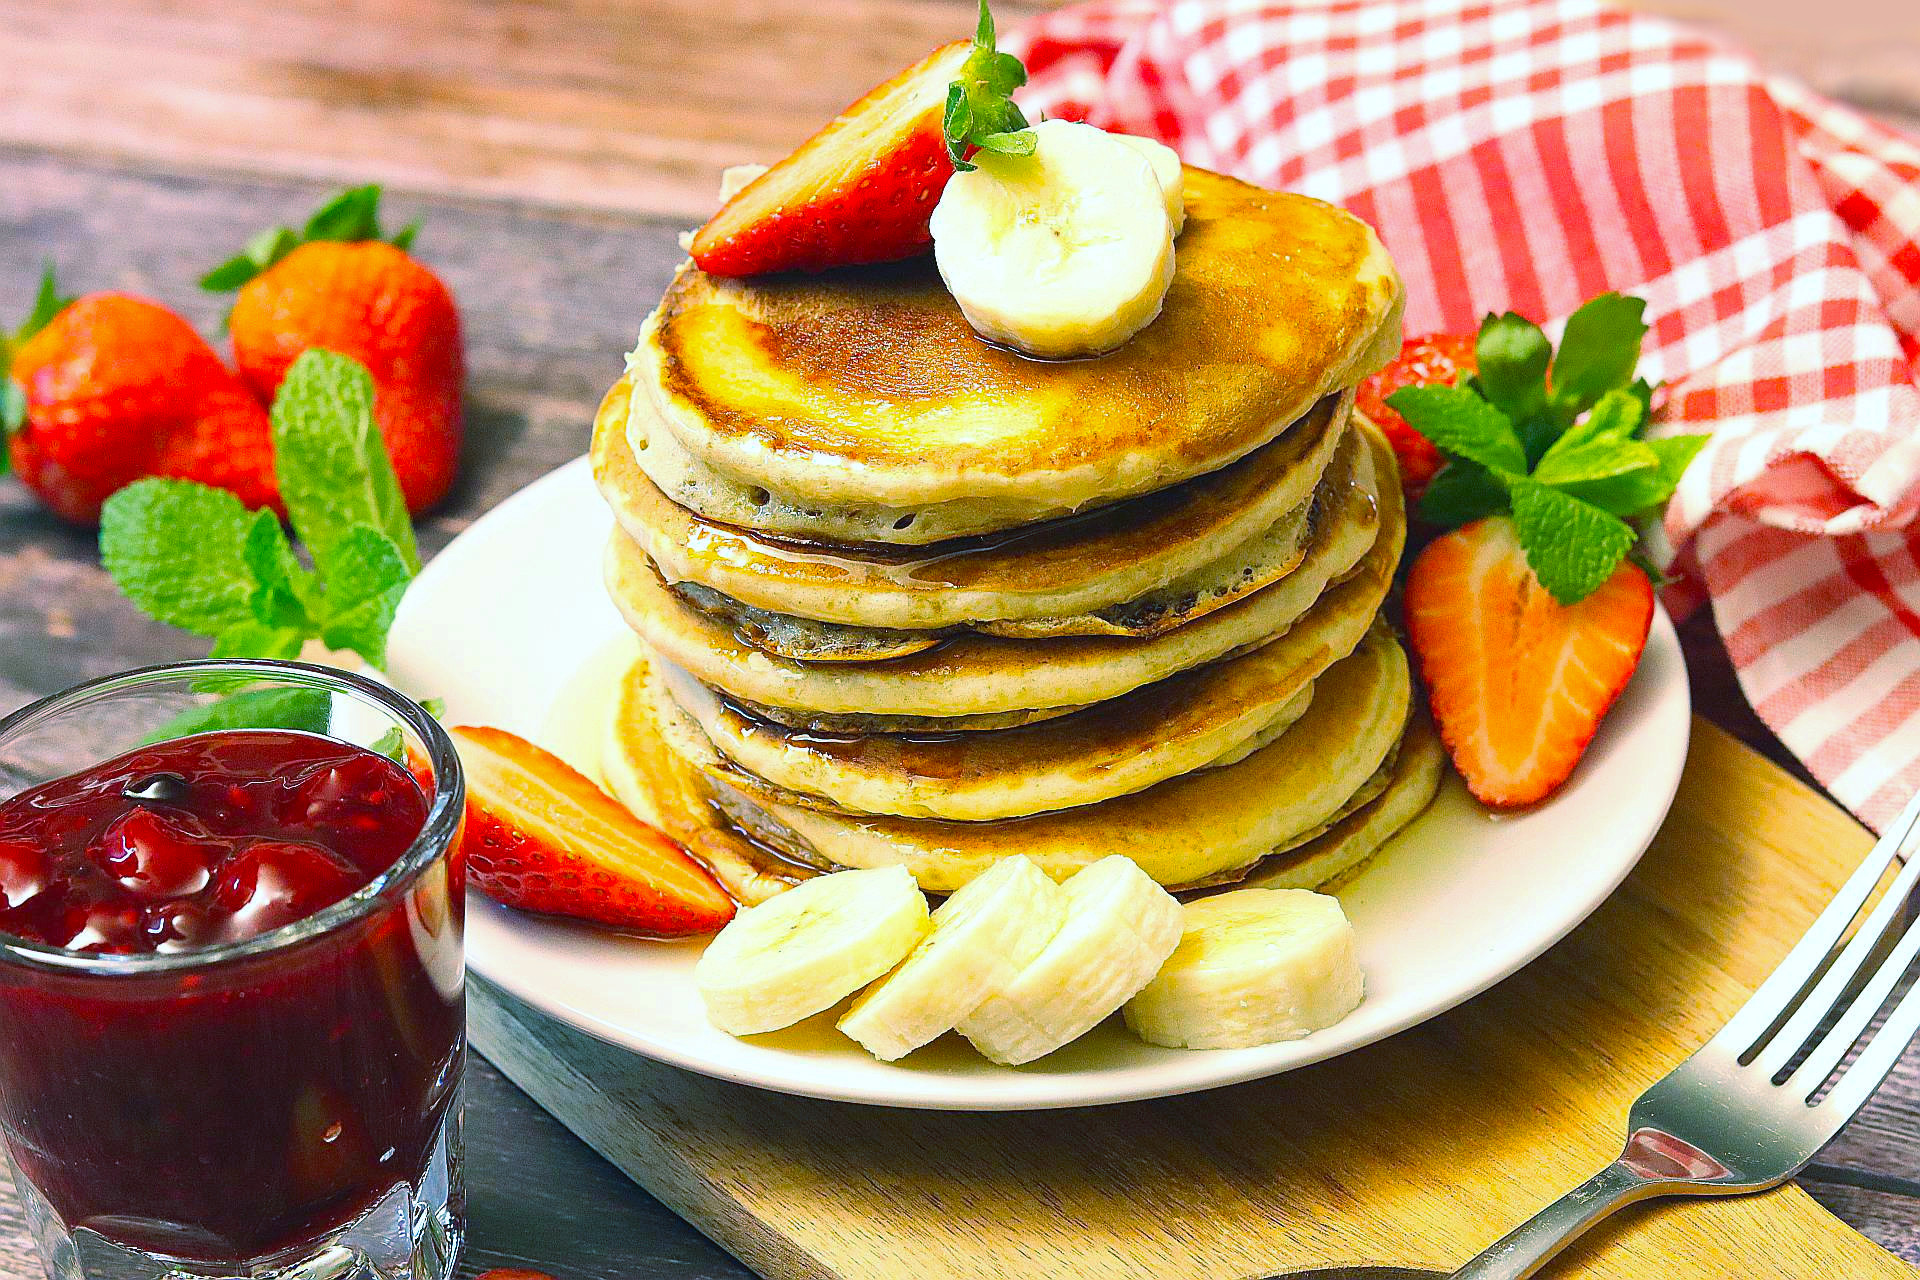 American Pancakes mit Obst